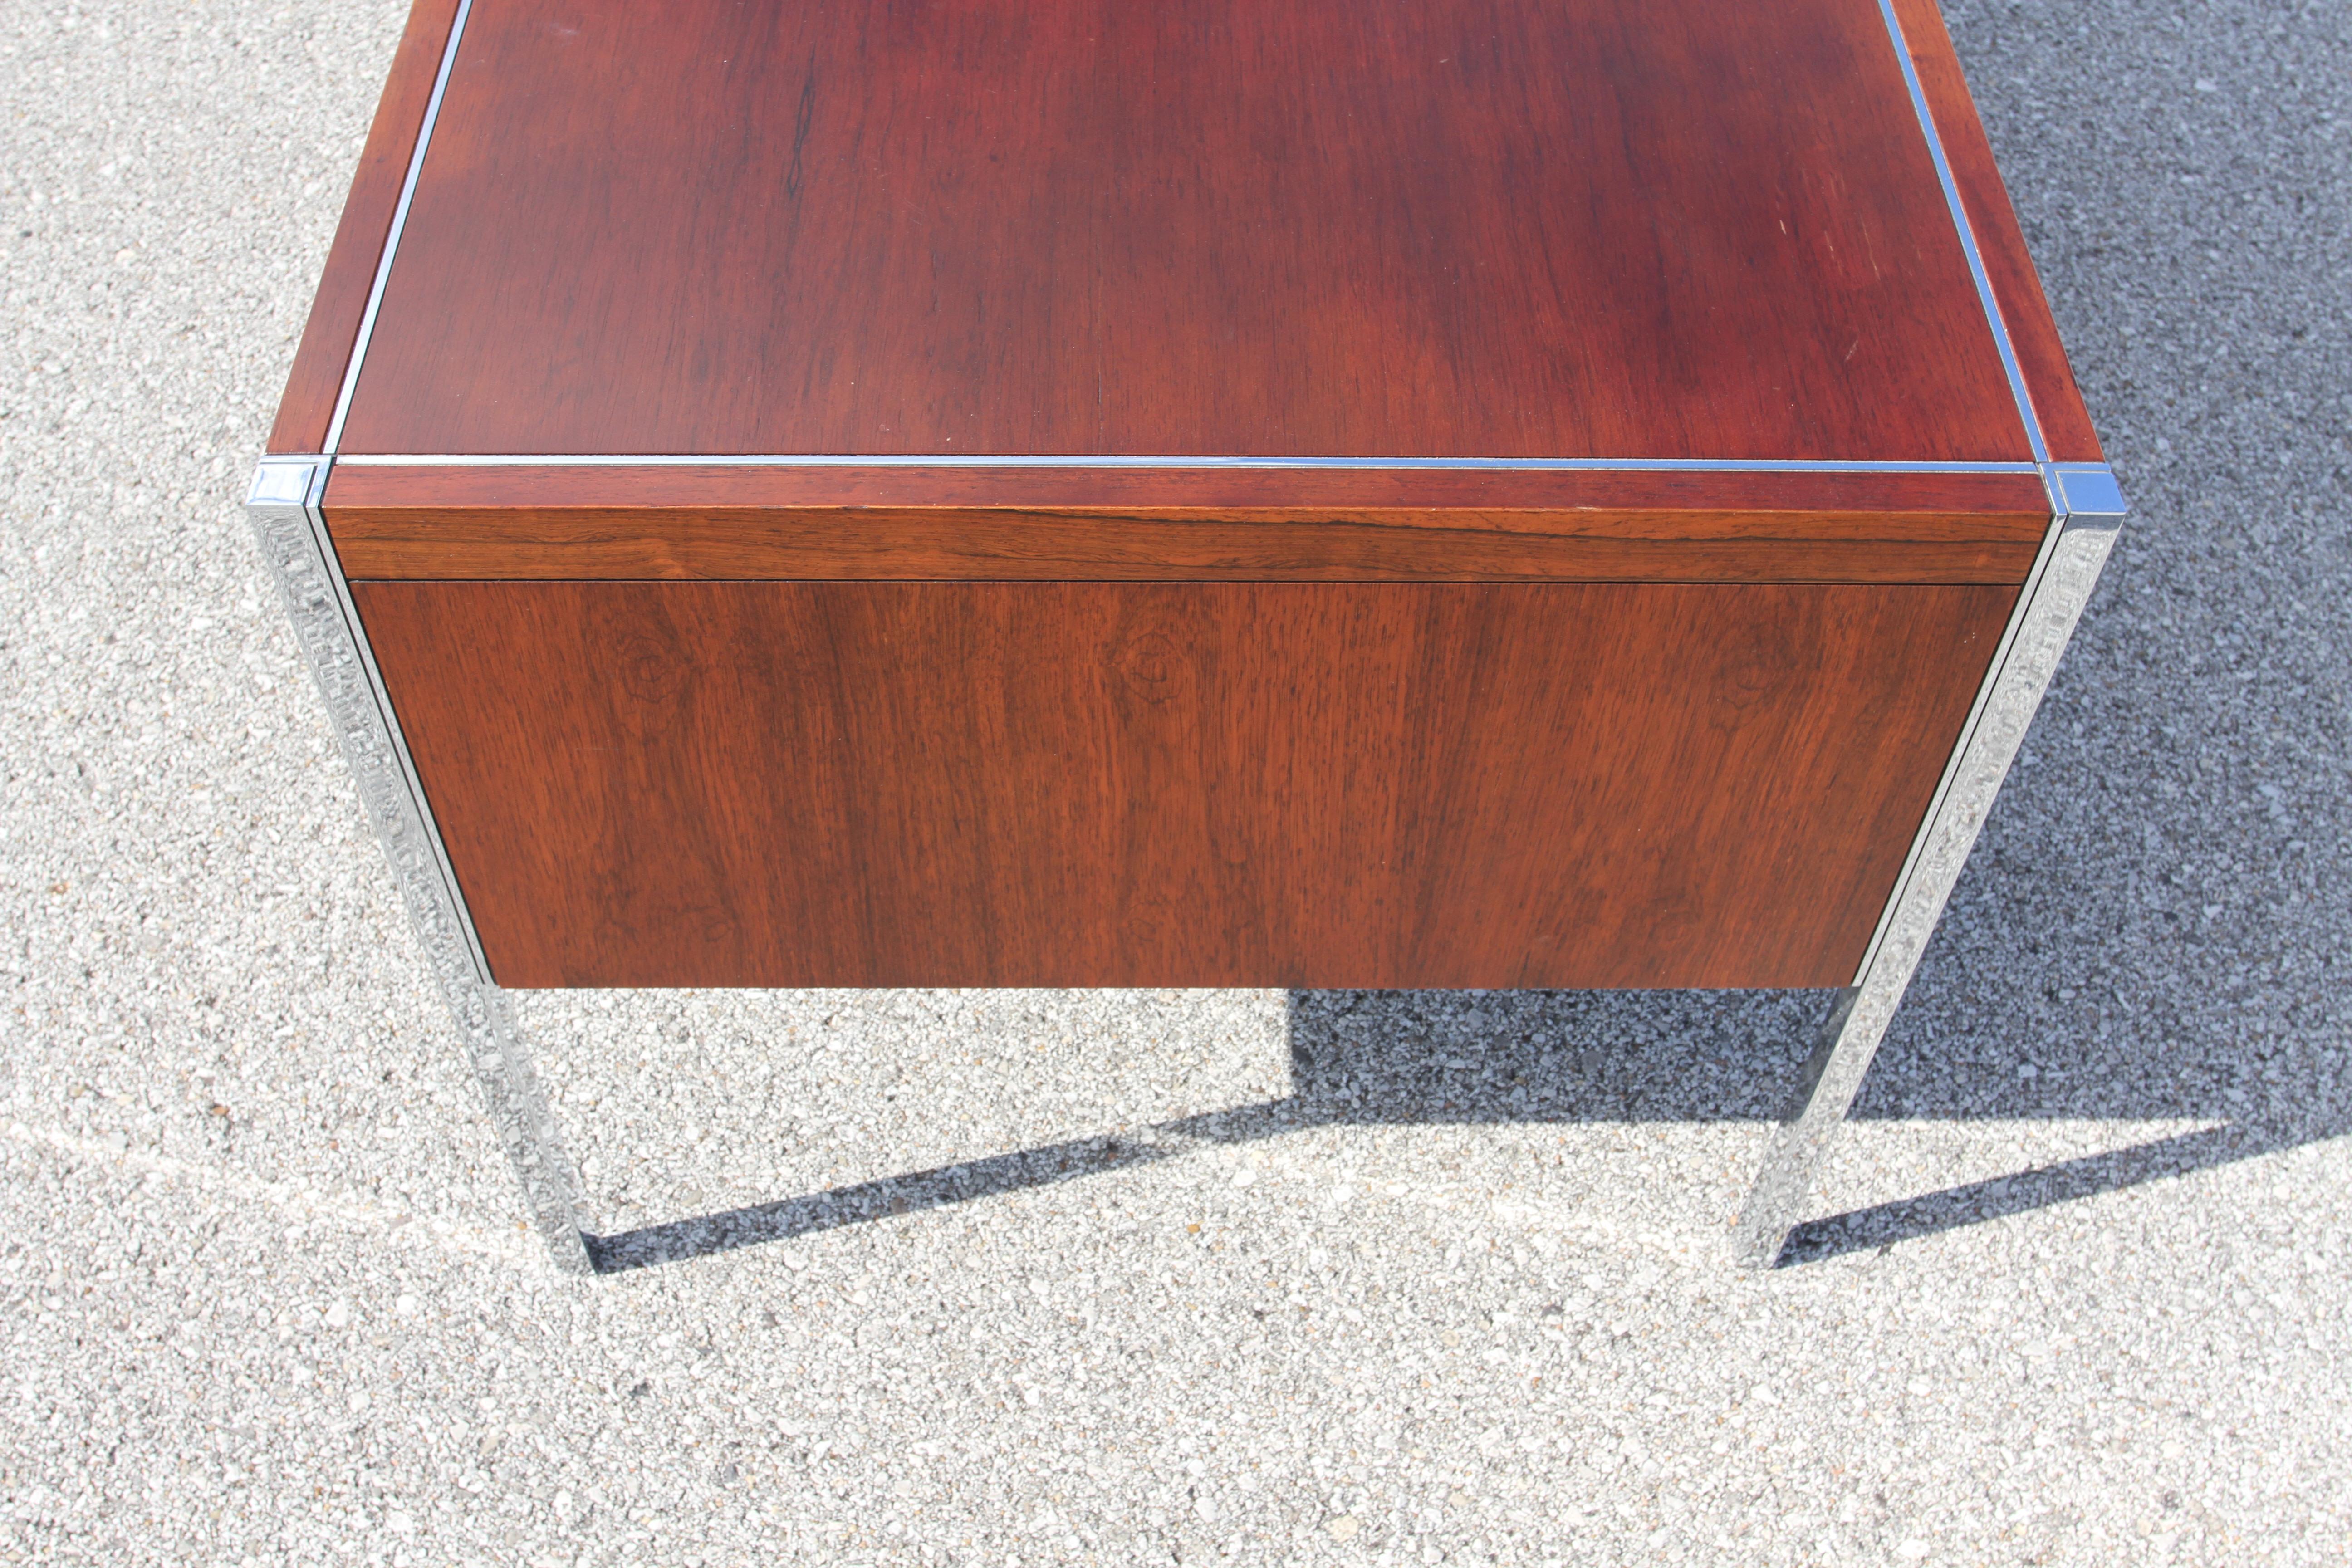 Richard Schultz for Knoll 1960s Mid-Century Modern Rosewood Executive Desk #4146 For Sale 14